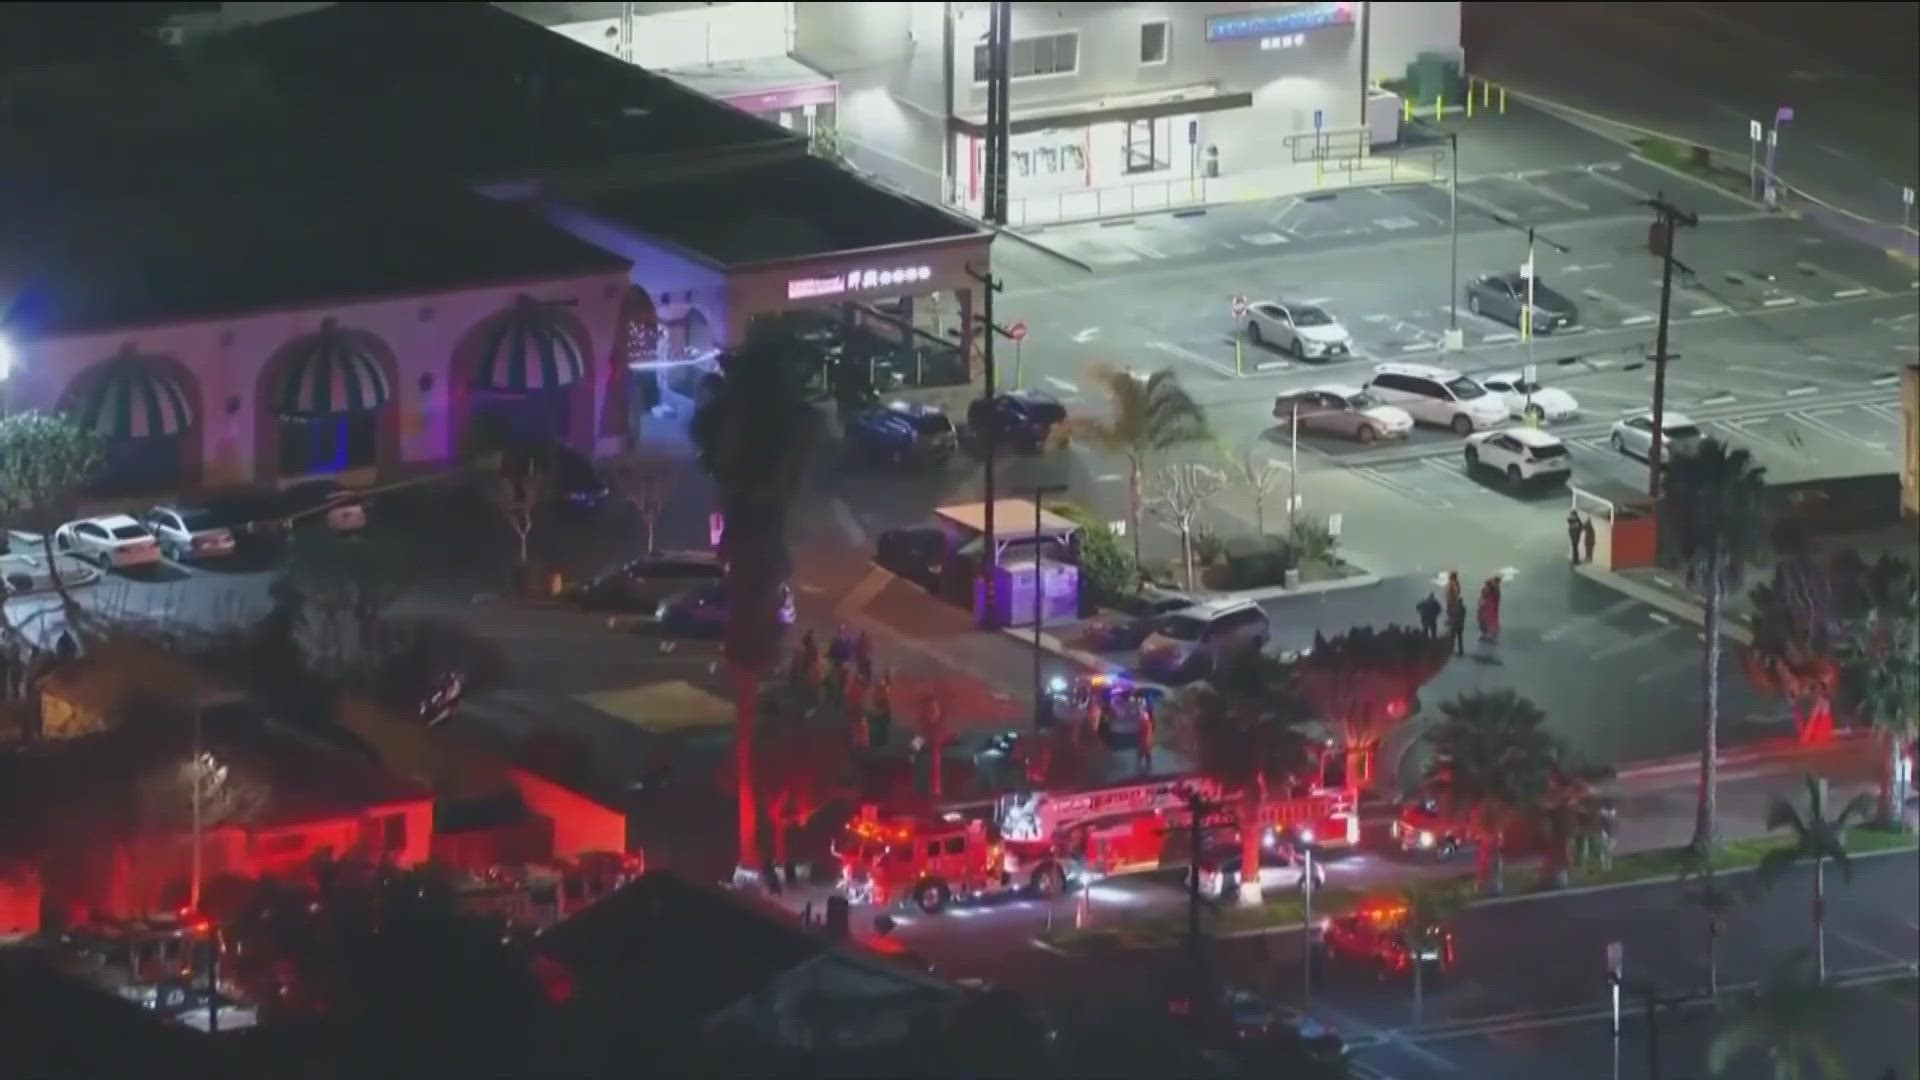 Video: Inside the Monterey Park dance studio before a man opened fire, killing 11 people.